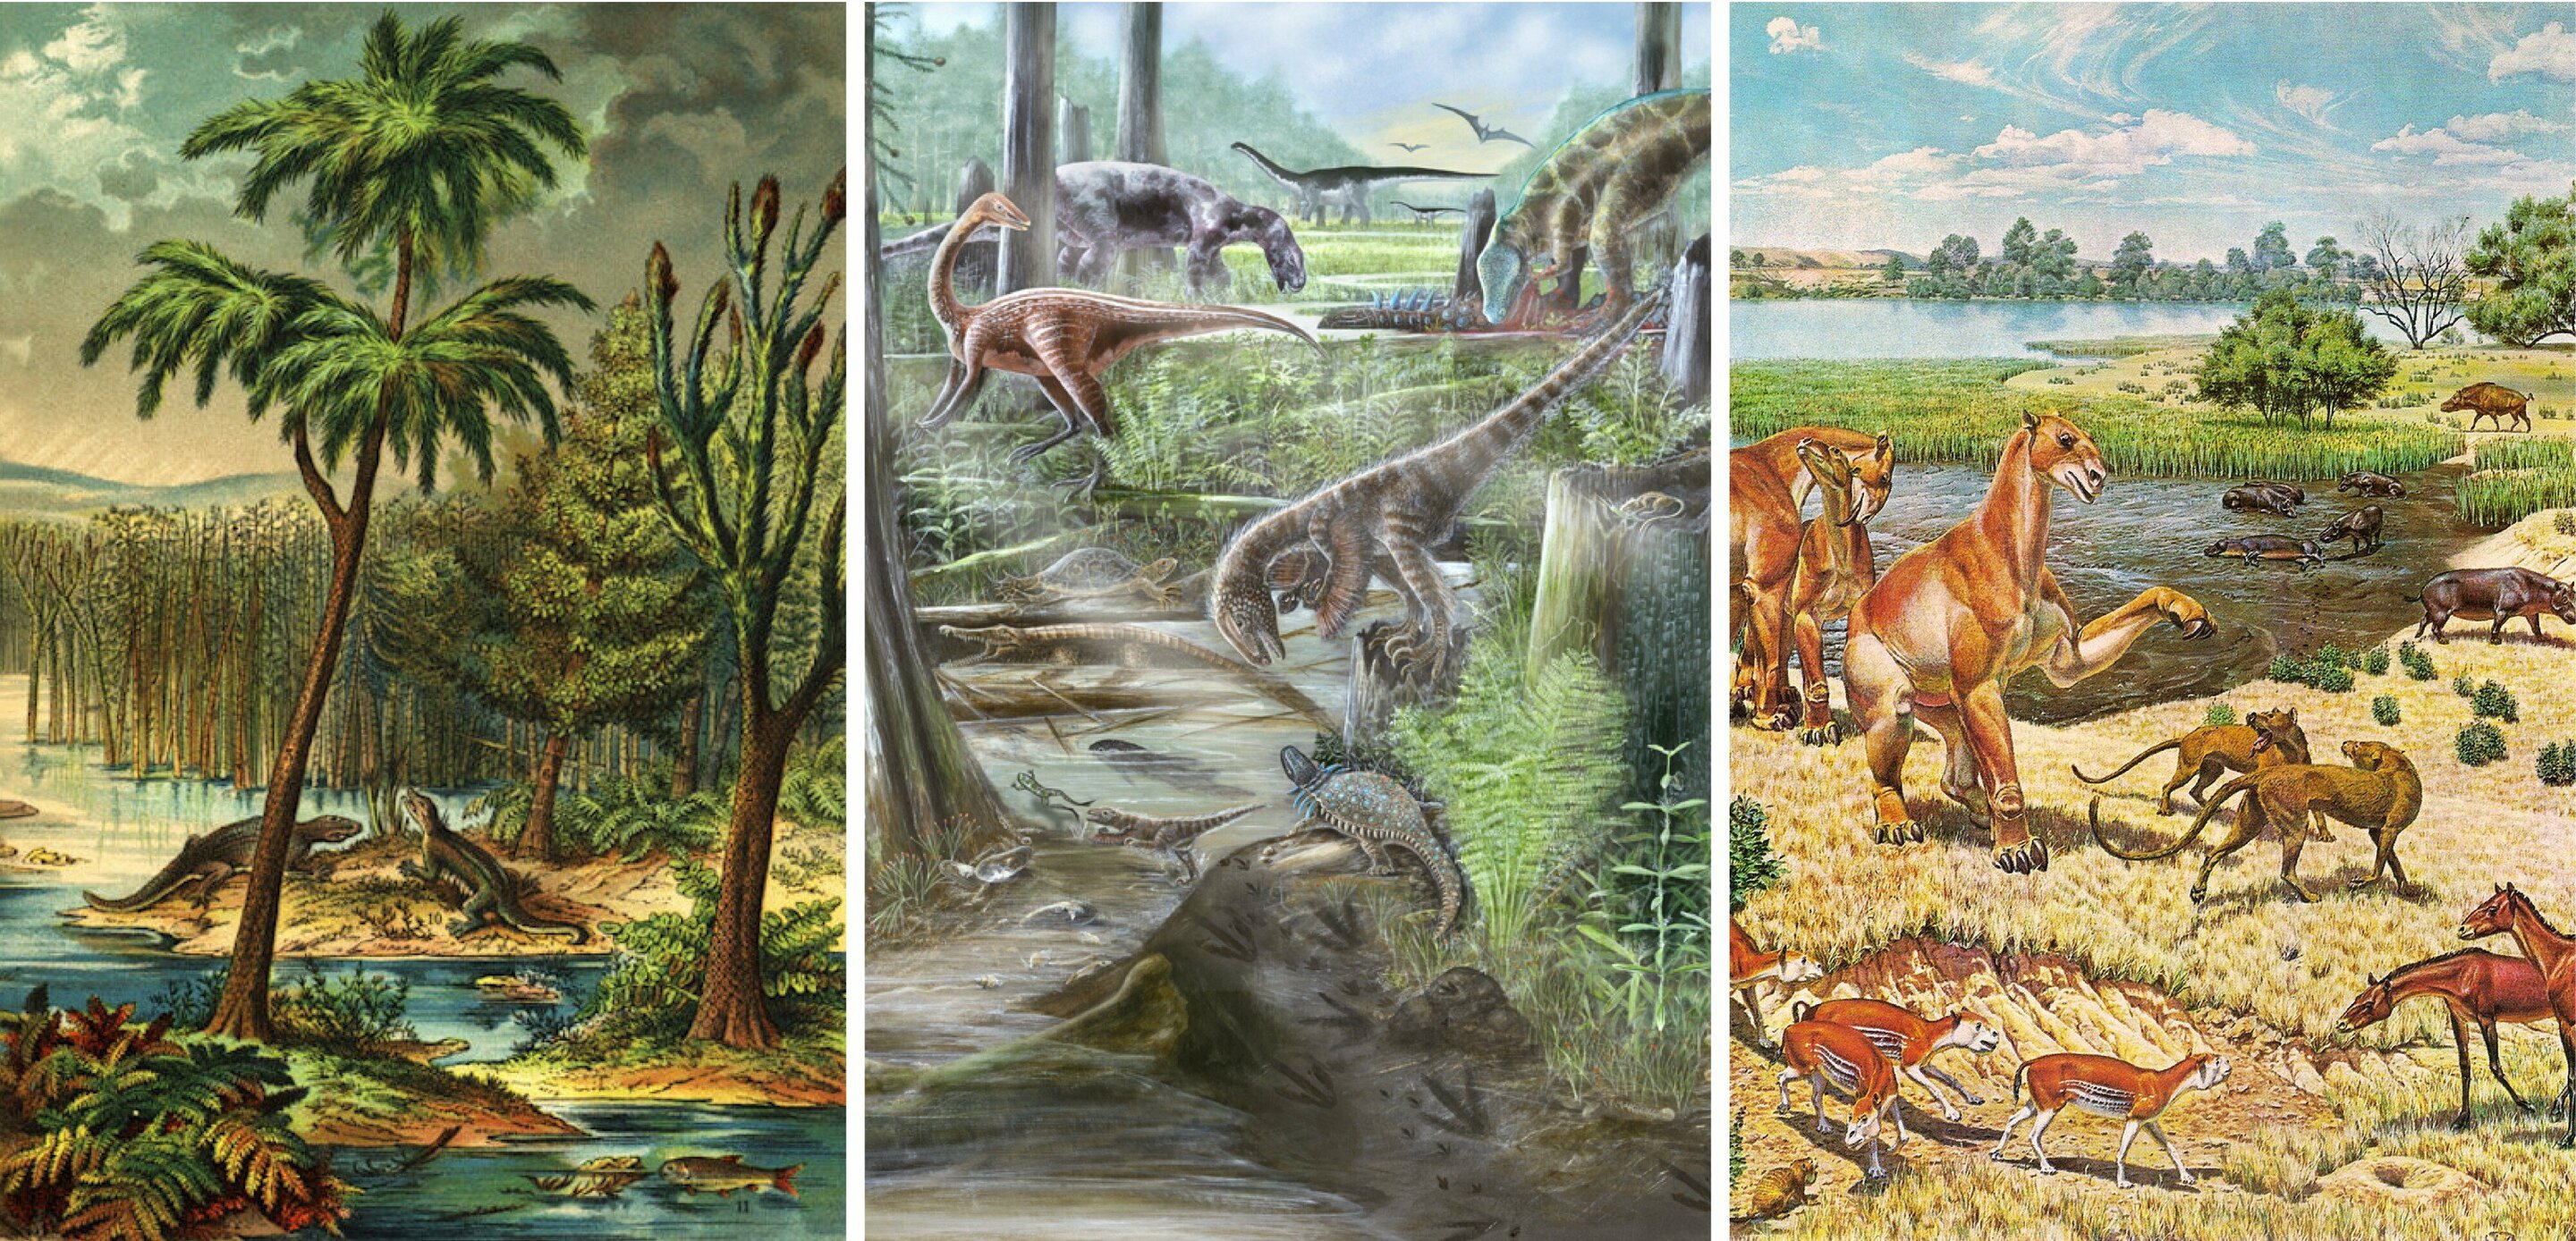 The diversity of life on Earth has not changed since the dinosaurs